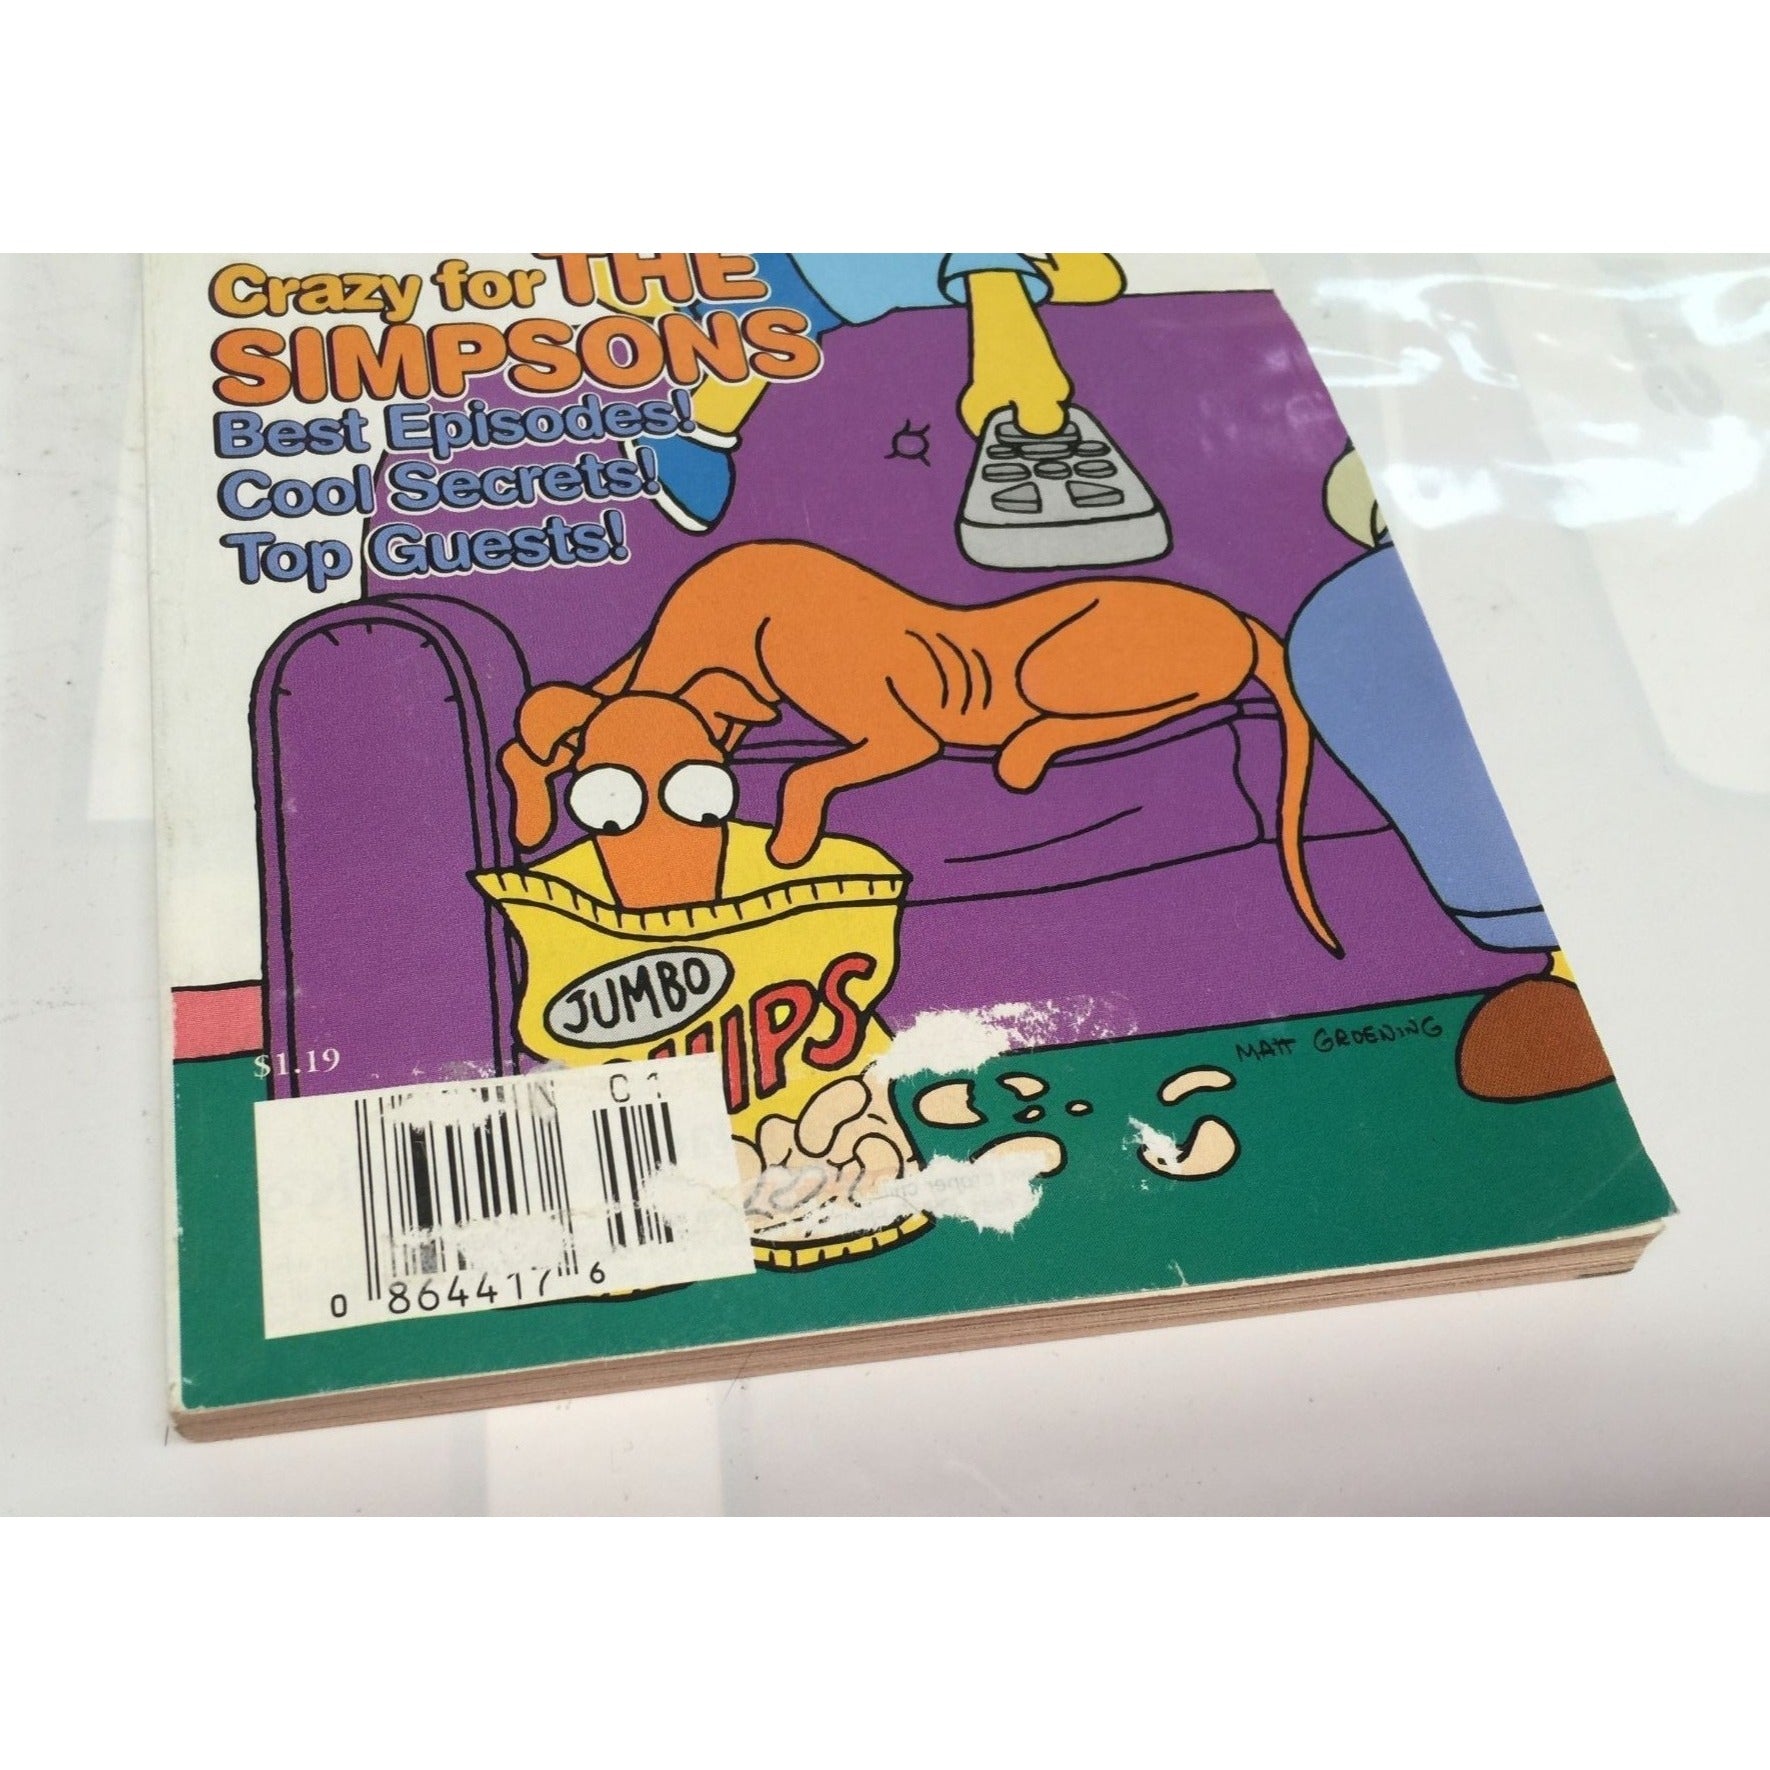 Vintage TV Guide Crazy for The Simpsons Jan 3-9, 1998 Book